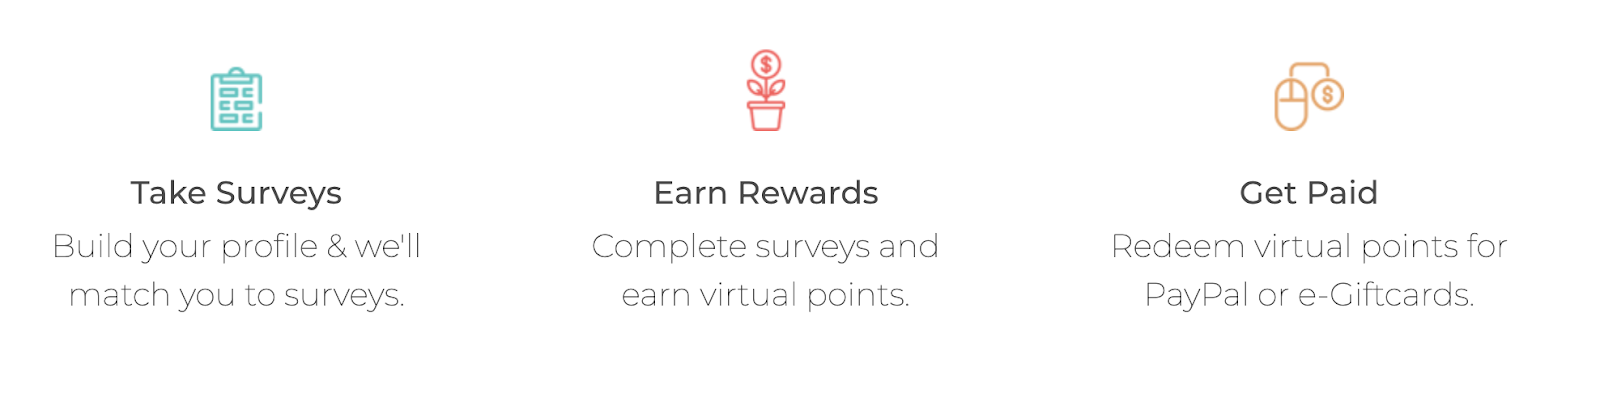 The Survey Junkie website showing the process of taking surveys, earning rewards, and cashing out. 